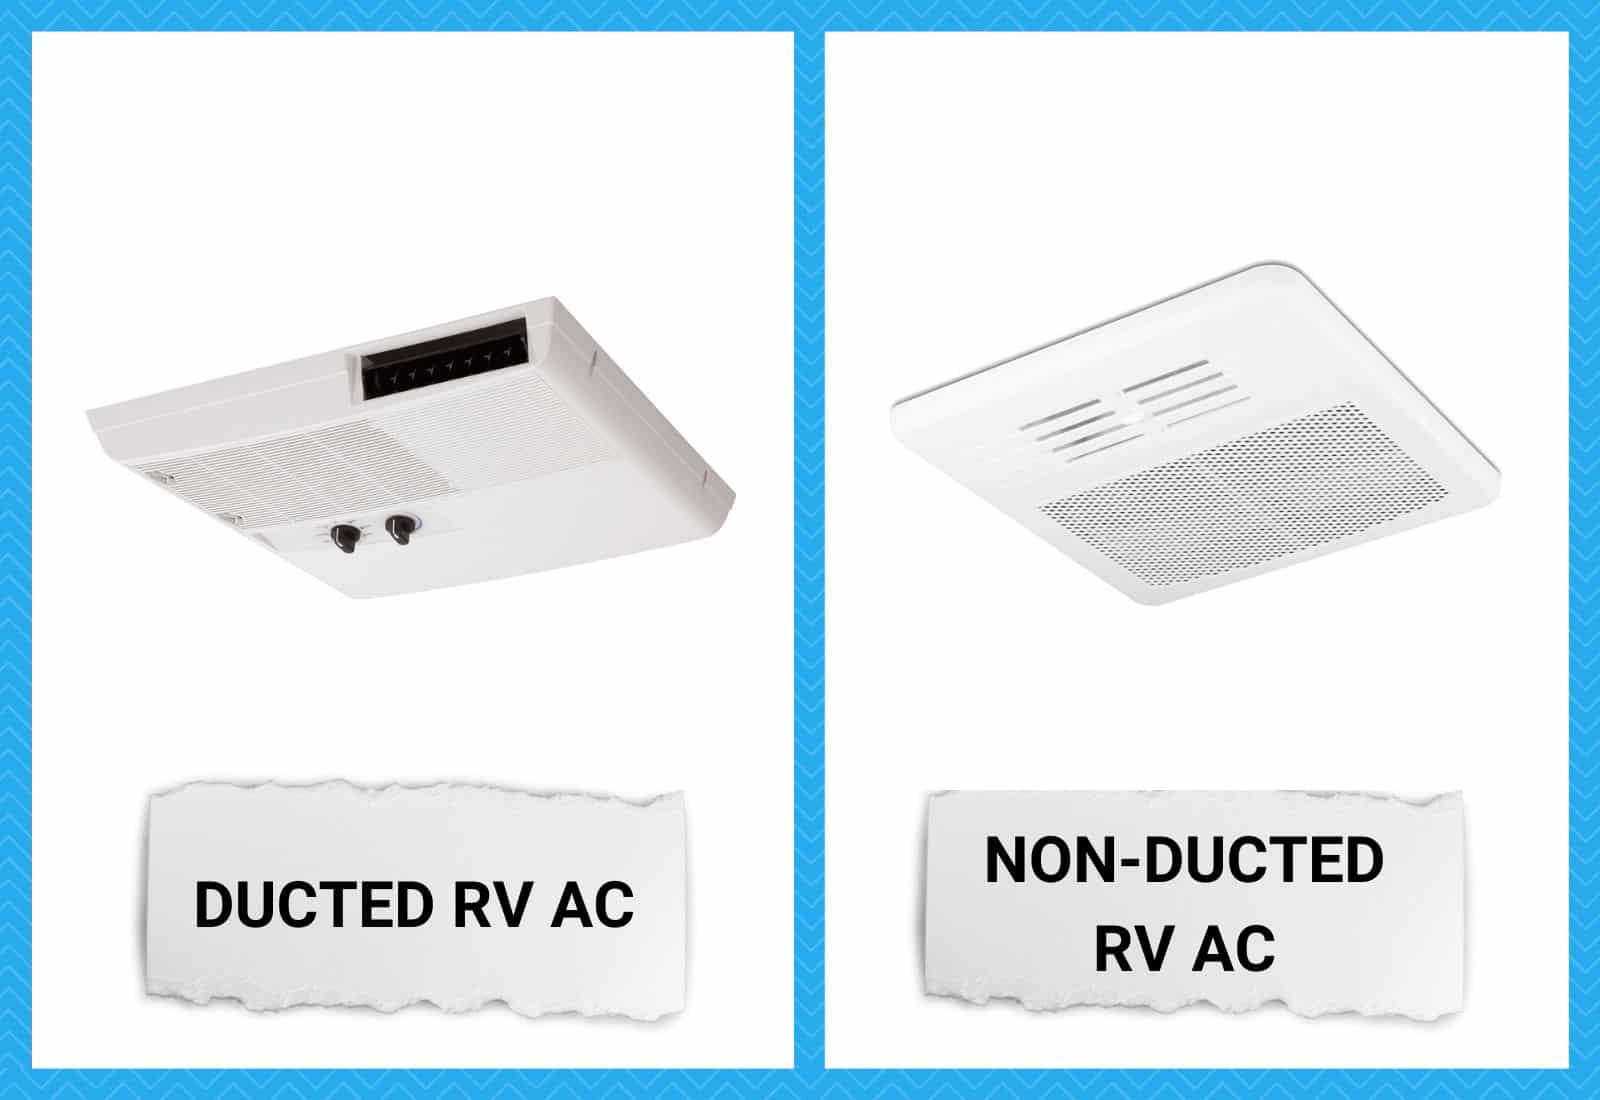 RV Air Conditioning: Ducted vs. Non-Ducted